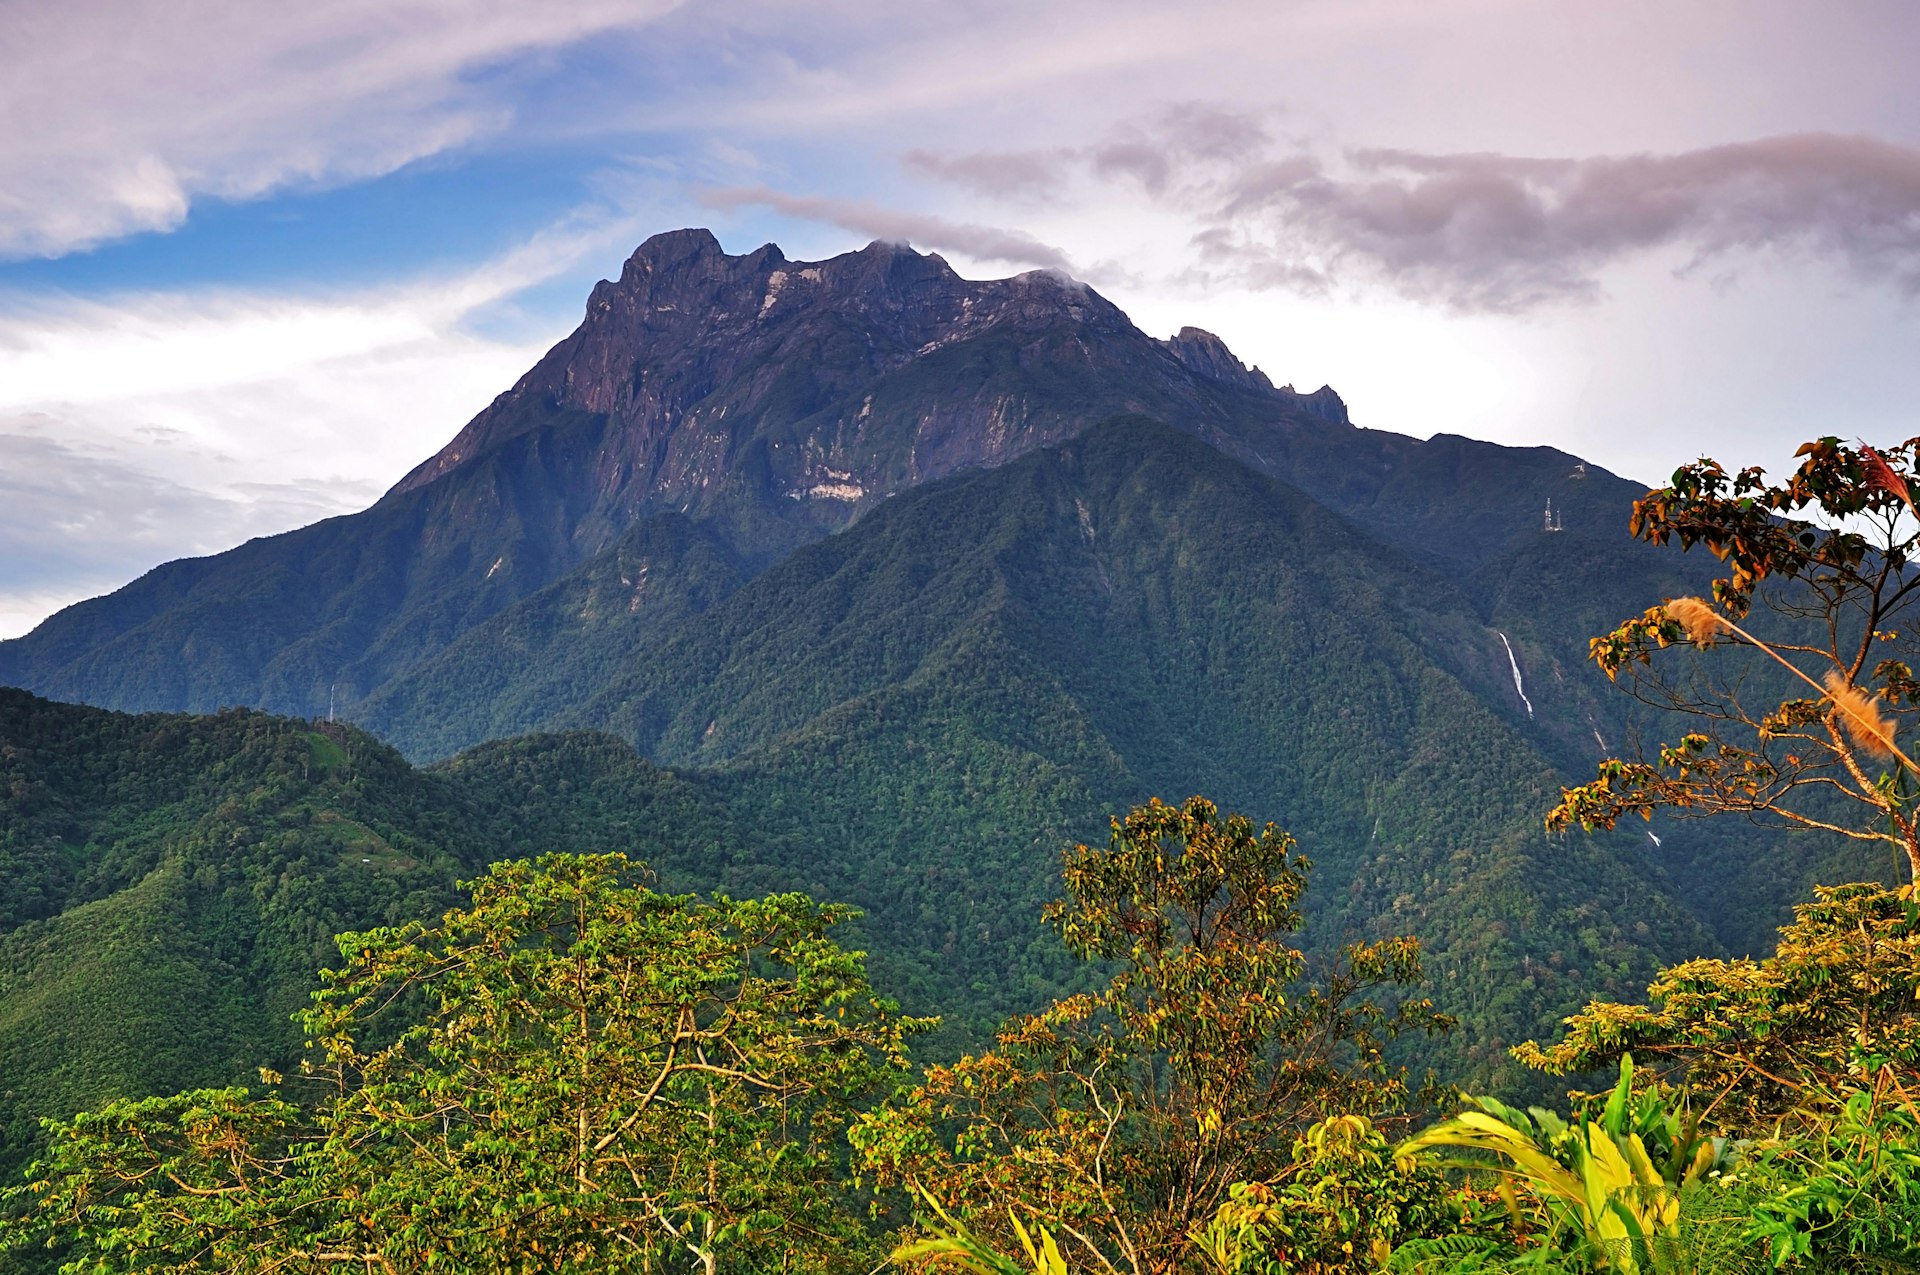 Borneo's Mount Kinabalu, a natural skyscraper with amazing biodiversity, soars into the sky